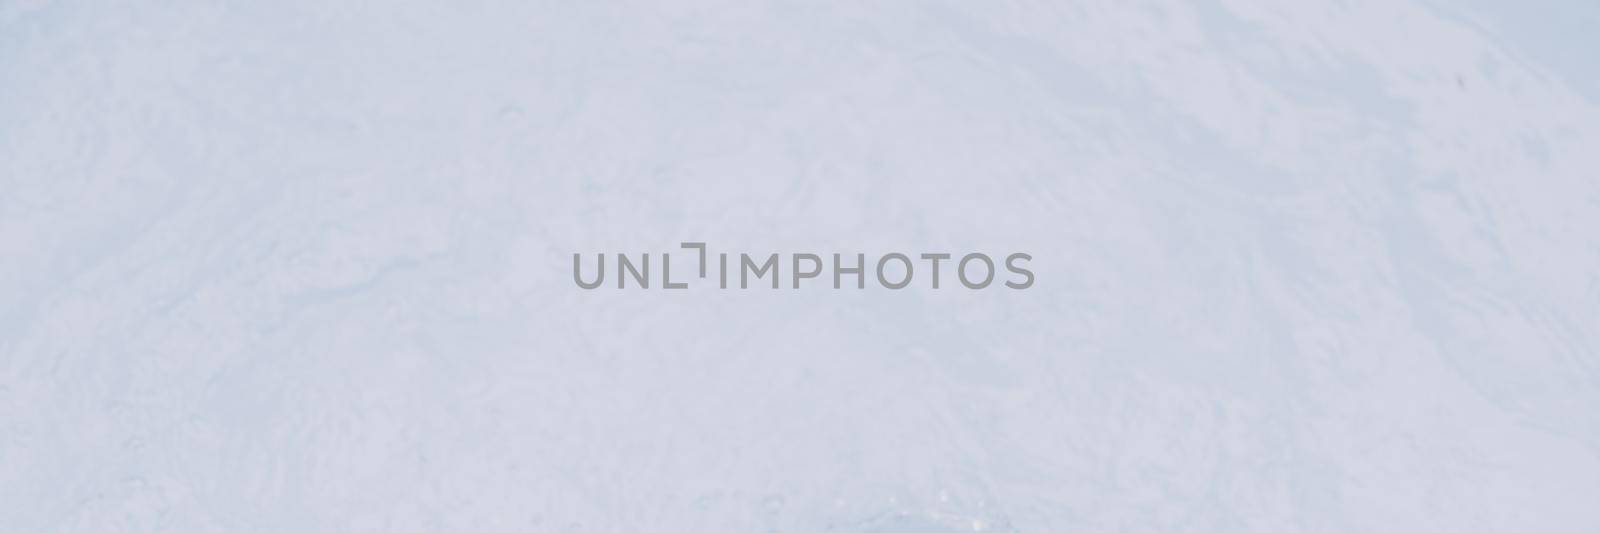 BANNER Abstract real nature water surface texture copy space soft abstract background. Light white blue Lavender colour. For presentation design works cards. Romance Relaxation simplicity Minimalism by nandrey85